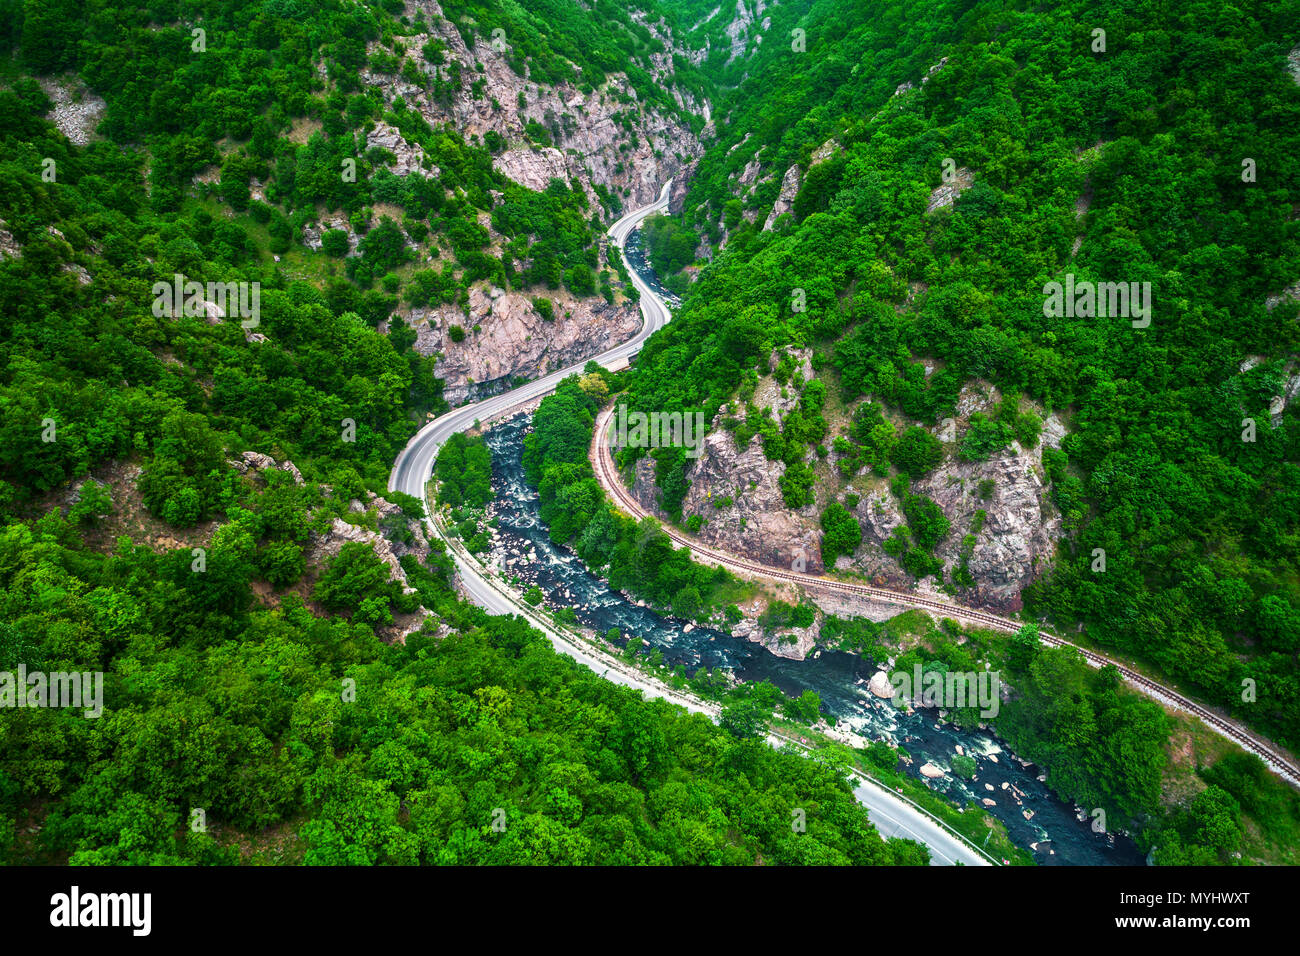 Aerial view of drone over mountain road and curves going through forest landscape Stock Photo